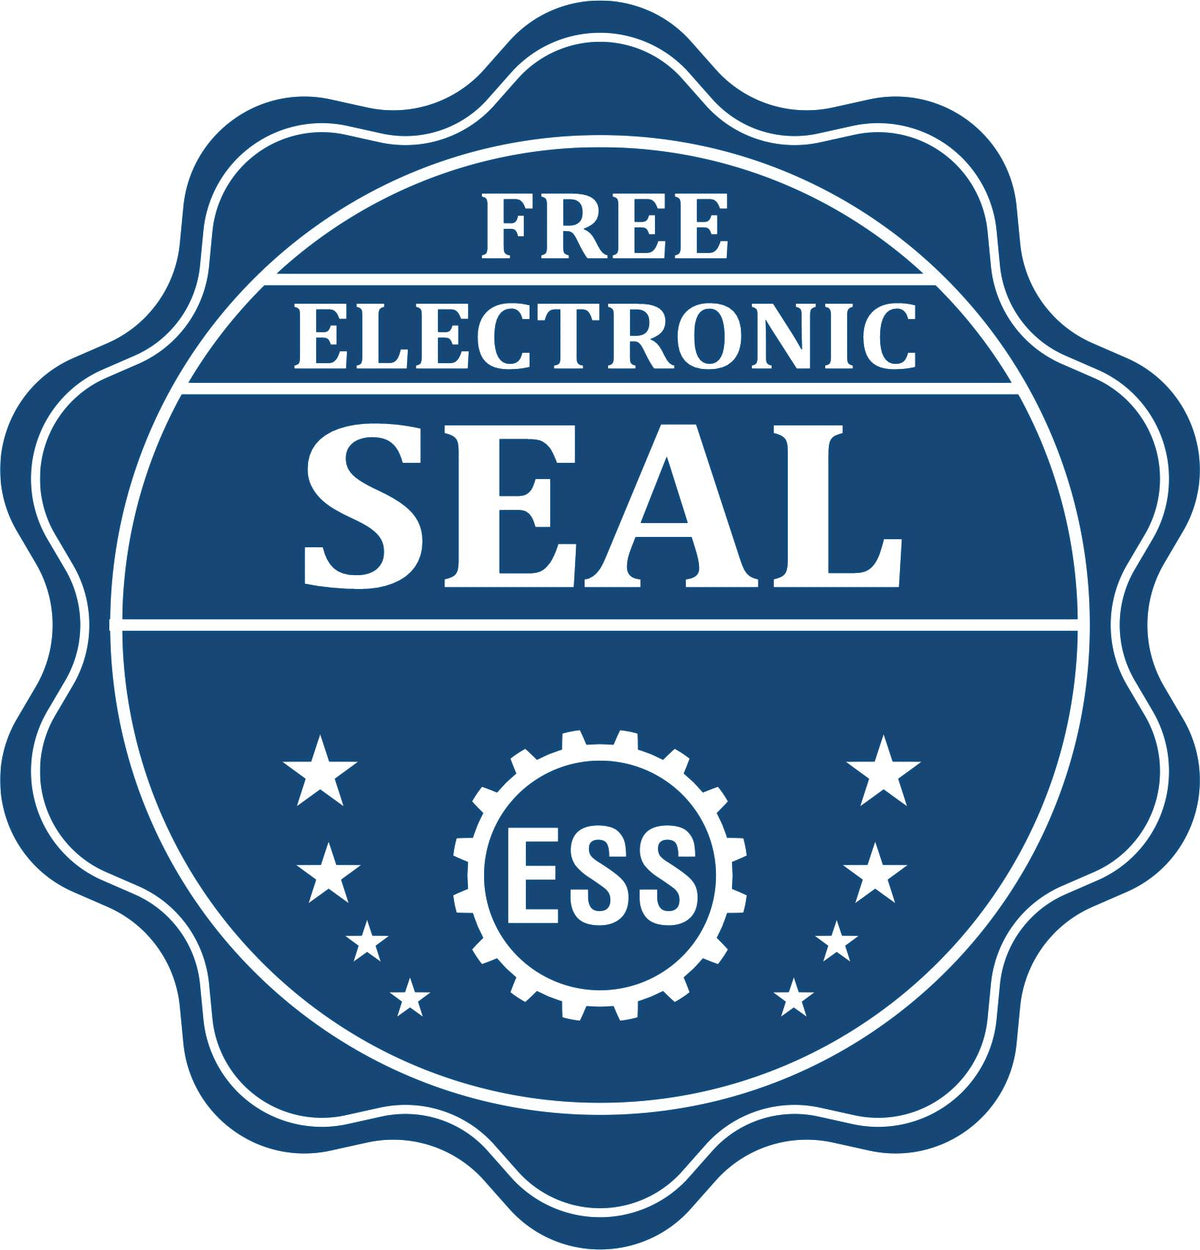 A badge showing a free electronic seal for the Gift Minnesota Engineer Seal with stars and the ESS gear on the emblem.